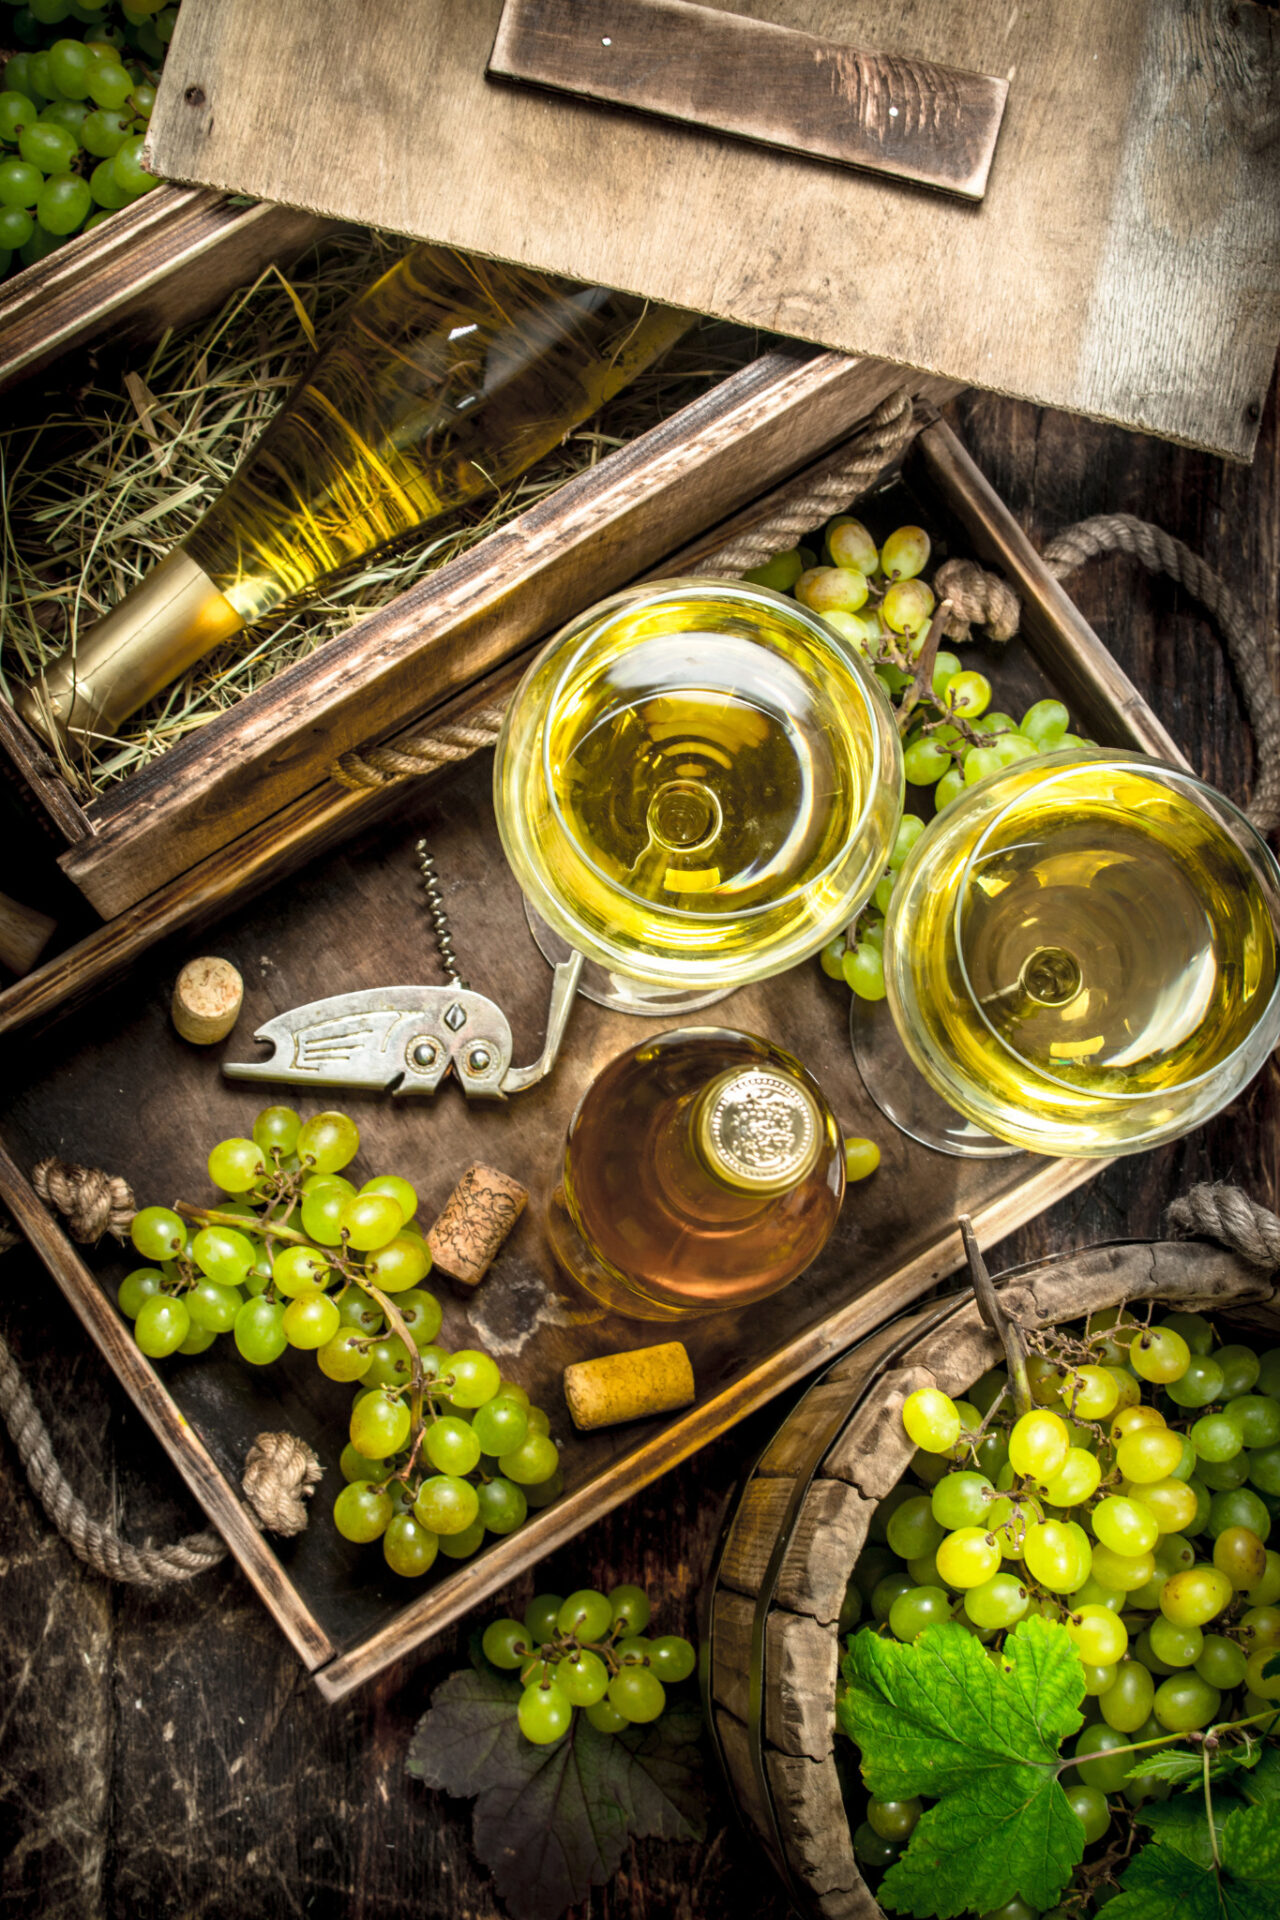 Two glasses of Sauvignon Blanc surrounded by white wine bottles and grapes